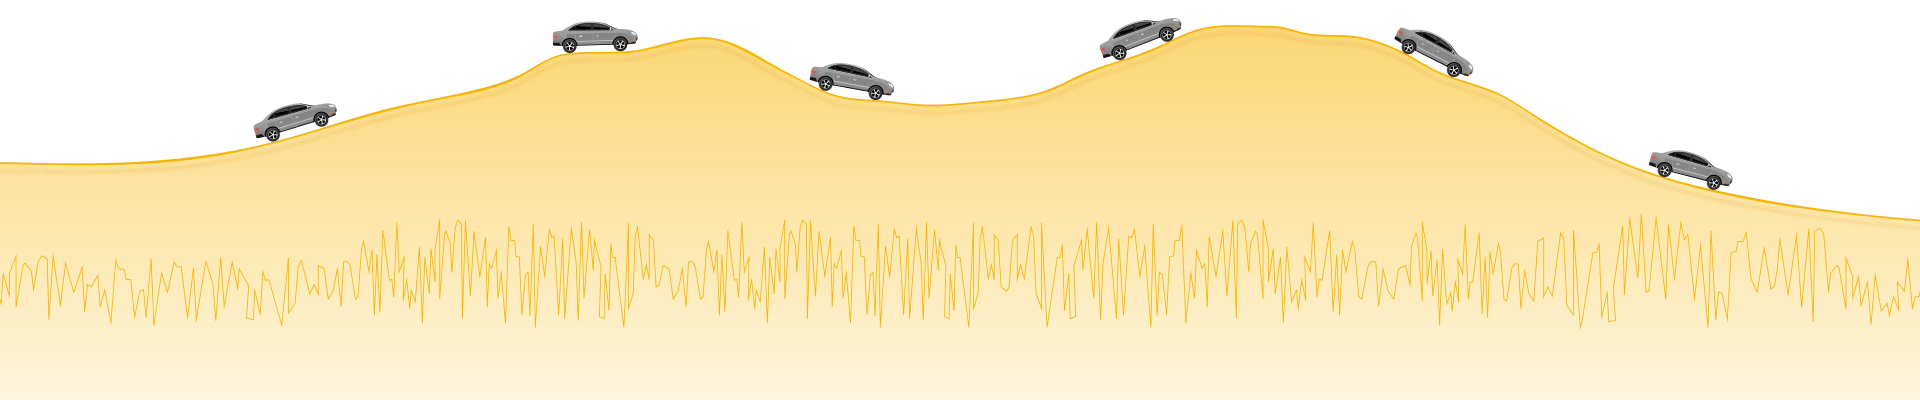 simulate the actual driving road conditions of electric vehicles by dynamic power or current waveform